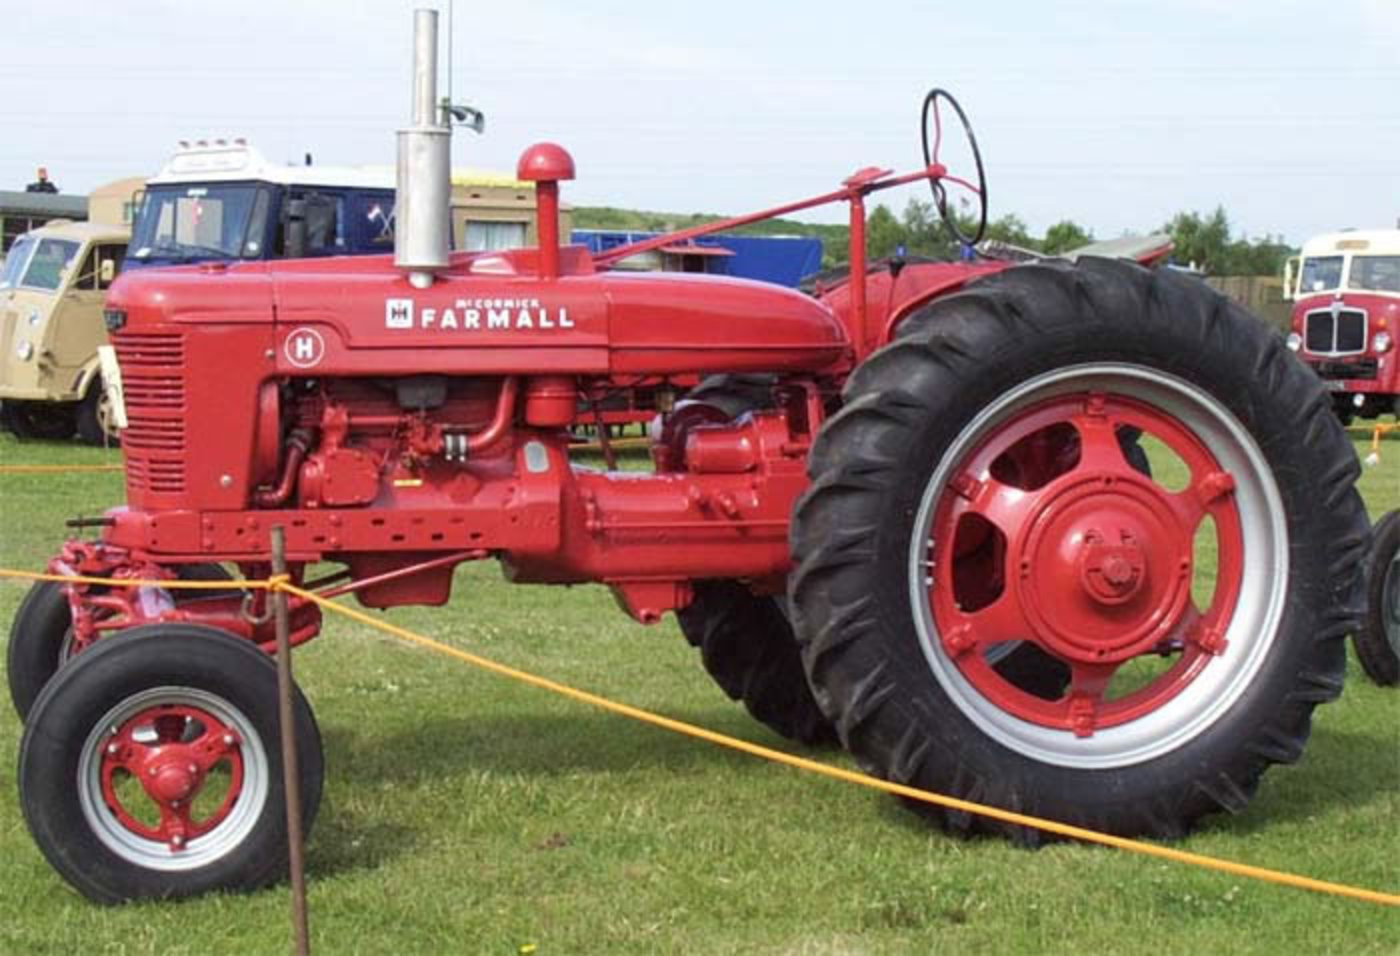 International Harvester Farmall Model Photo Gallery: Photo #04 out ...